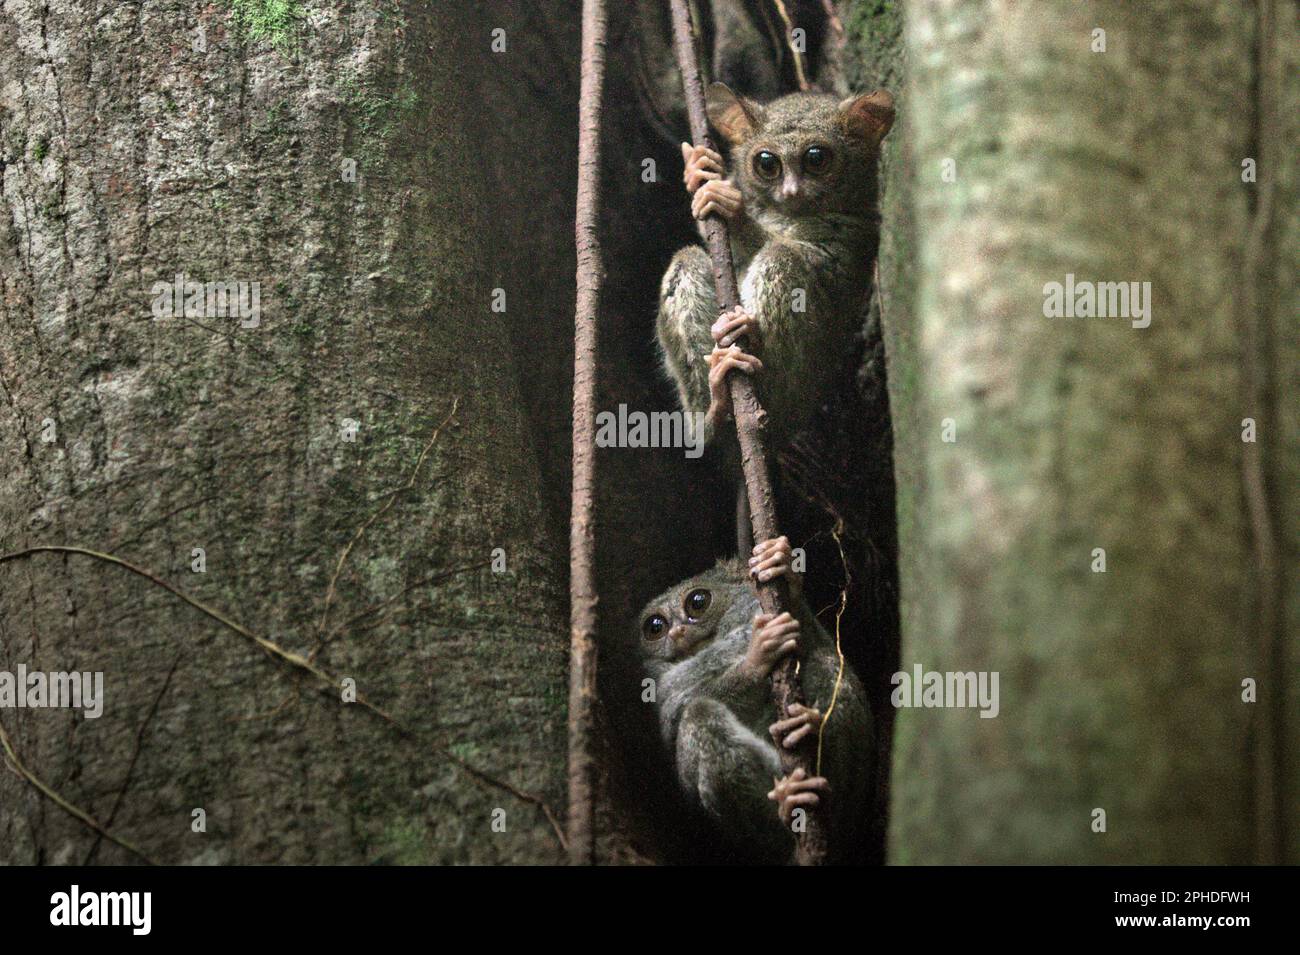 Two individuals of Gursky's spectral tarsier (Tarsius spectrumgurskyae), a nocturnal primate species, are visible on their tree nest in a broad daylight in Tangkoko Nature Reserve, North Sulawesi, Indonesia. Scientists have been warning that ecotourism or other kinds of human activity in wildlife habitat can gradually change the wildlife behavior. 'Even when wildlife viewing is carried out exclusively by qualified and trained guides, tourism led to substantial changes in behavior of the viewed tarsiers,' wrote Sharon L. Gursky in her paper first published online on Springler in November 2022. Stock Photo